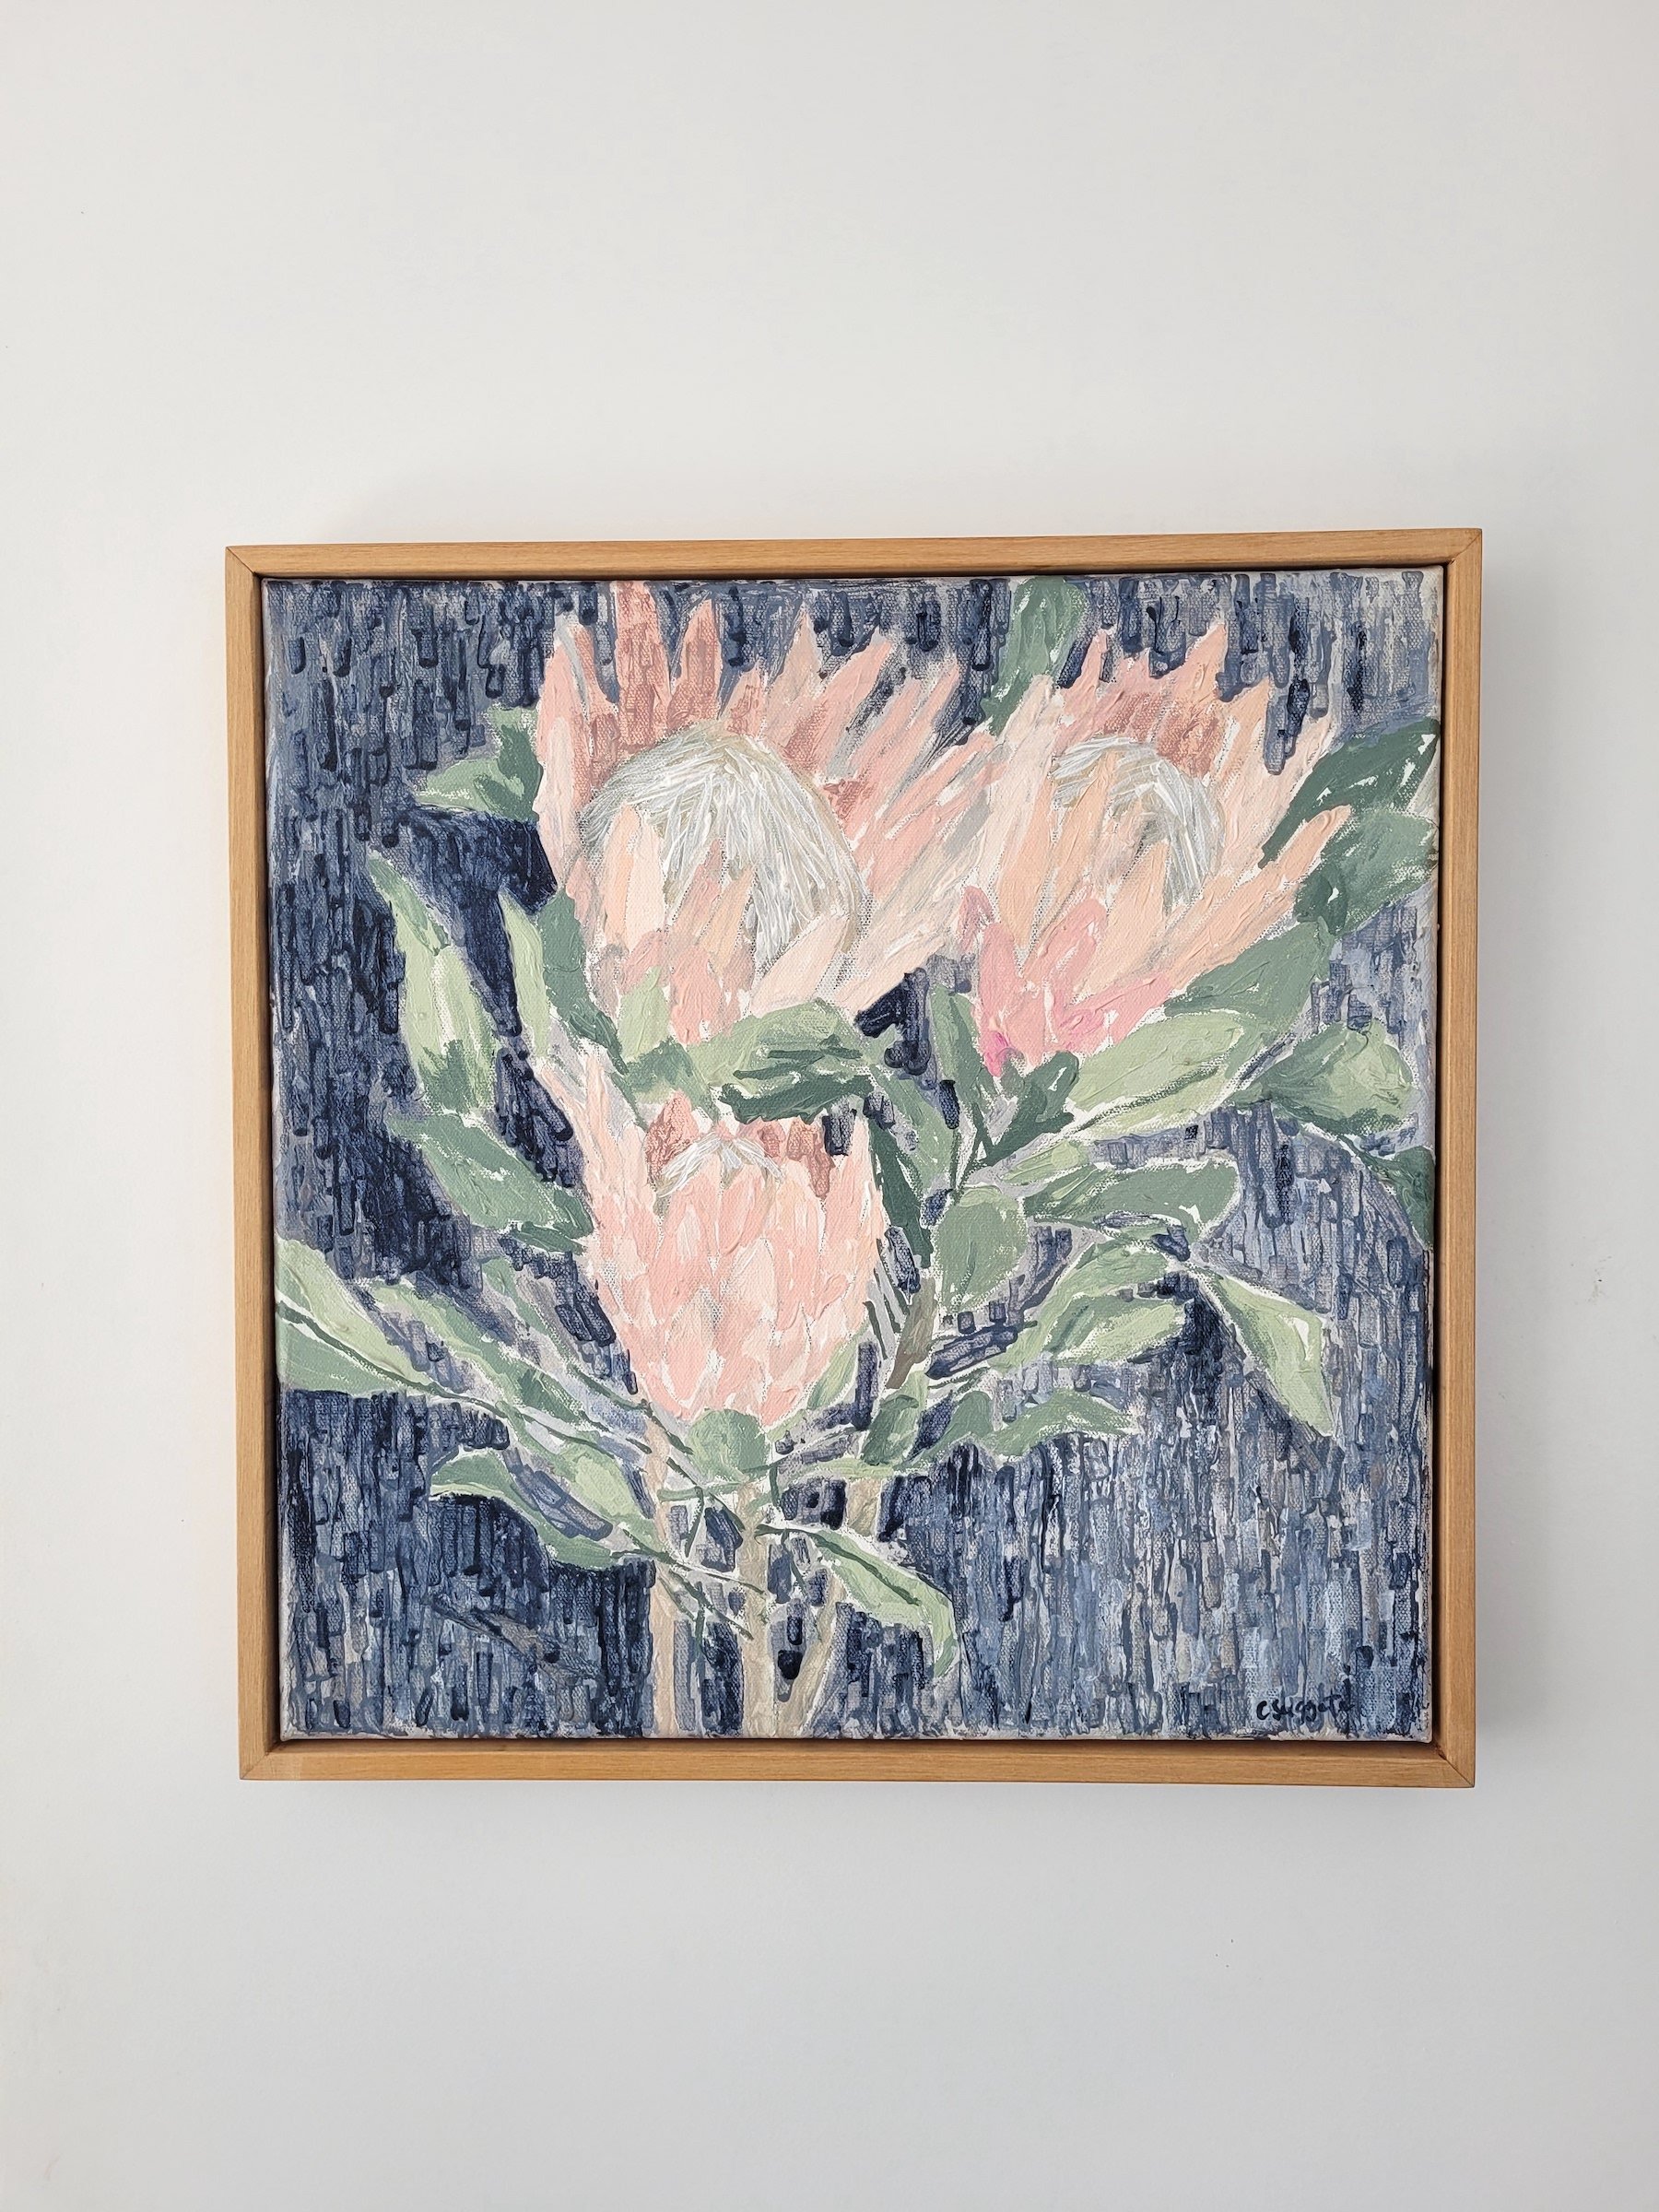 New Zealand floral and abstract Art for Sale — Charlotte Suggate